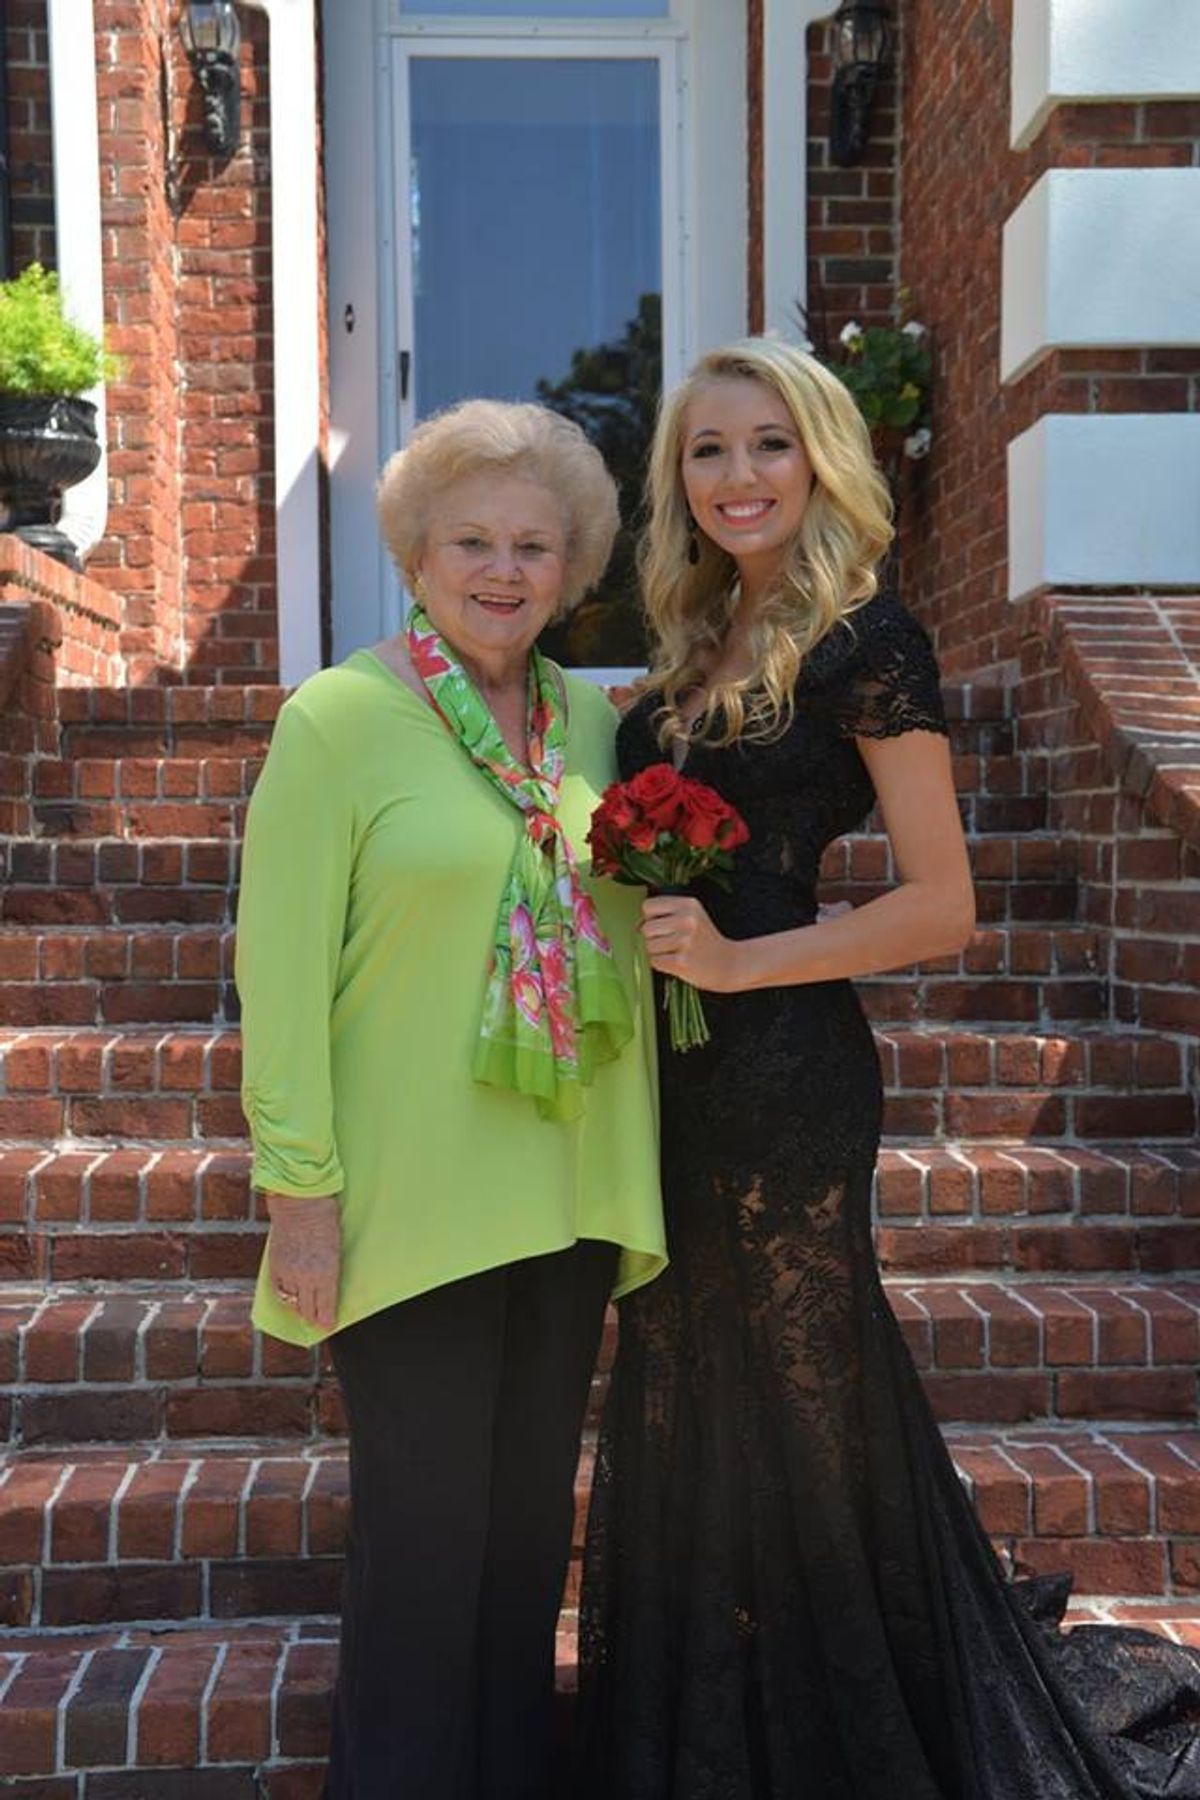 10 Lessons My Fabulous, Classy, Southern Belle Of A Mema Taught Me.